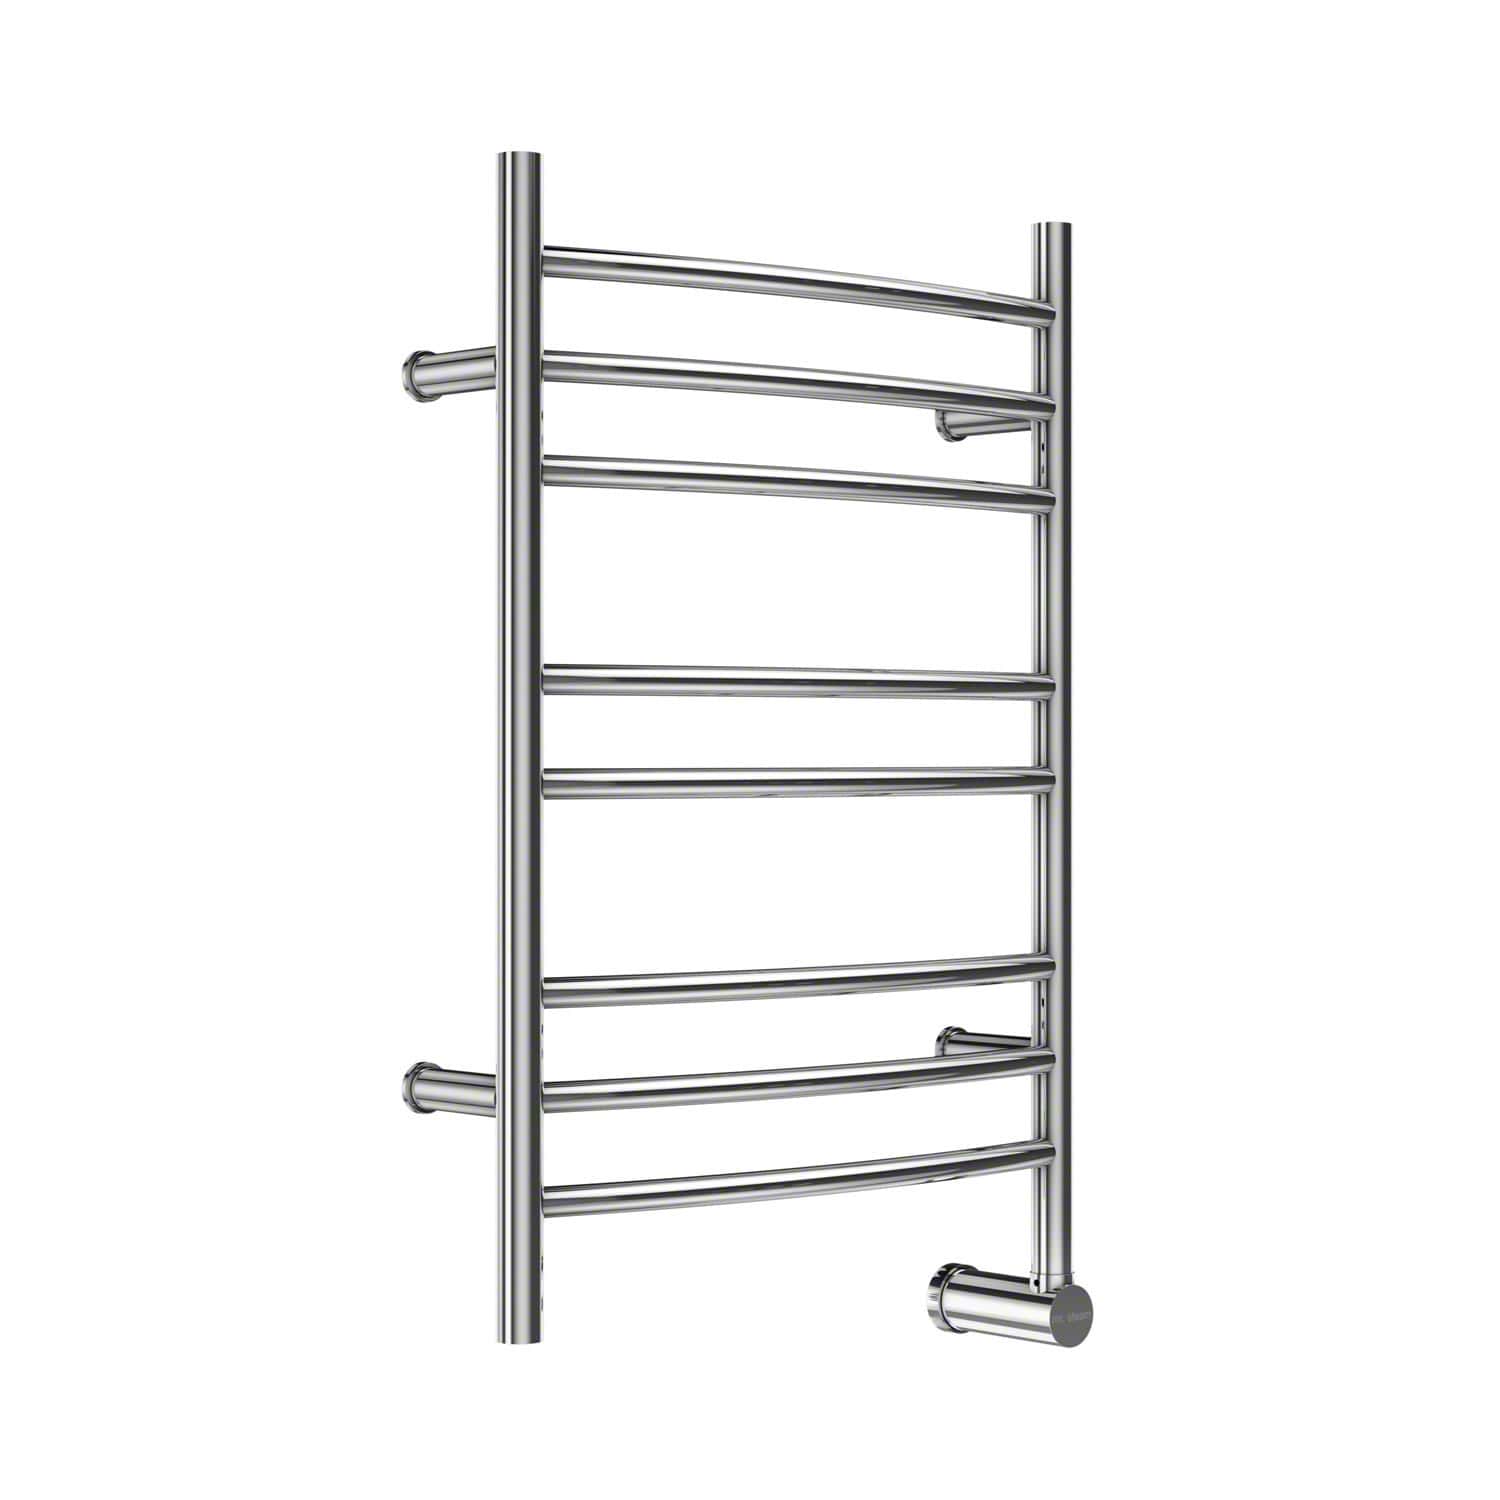 Mr. Steam Metro Collection® 8-Bar Wall-Mounted Electric Towel Warmer with Digital Timer in Stainless Steel Brushed